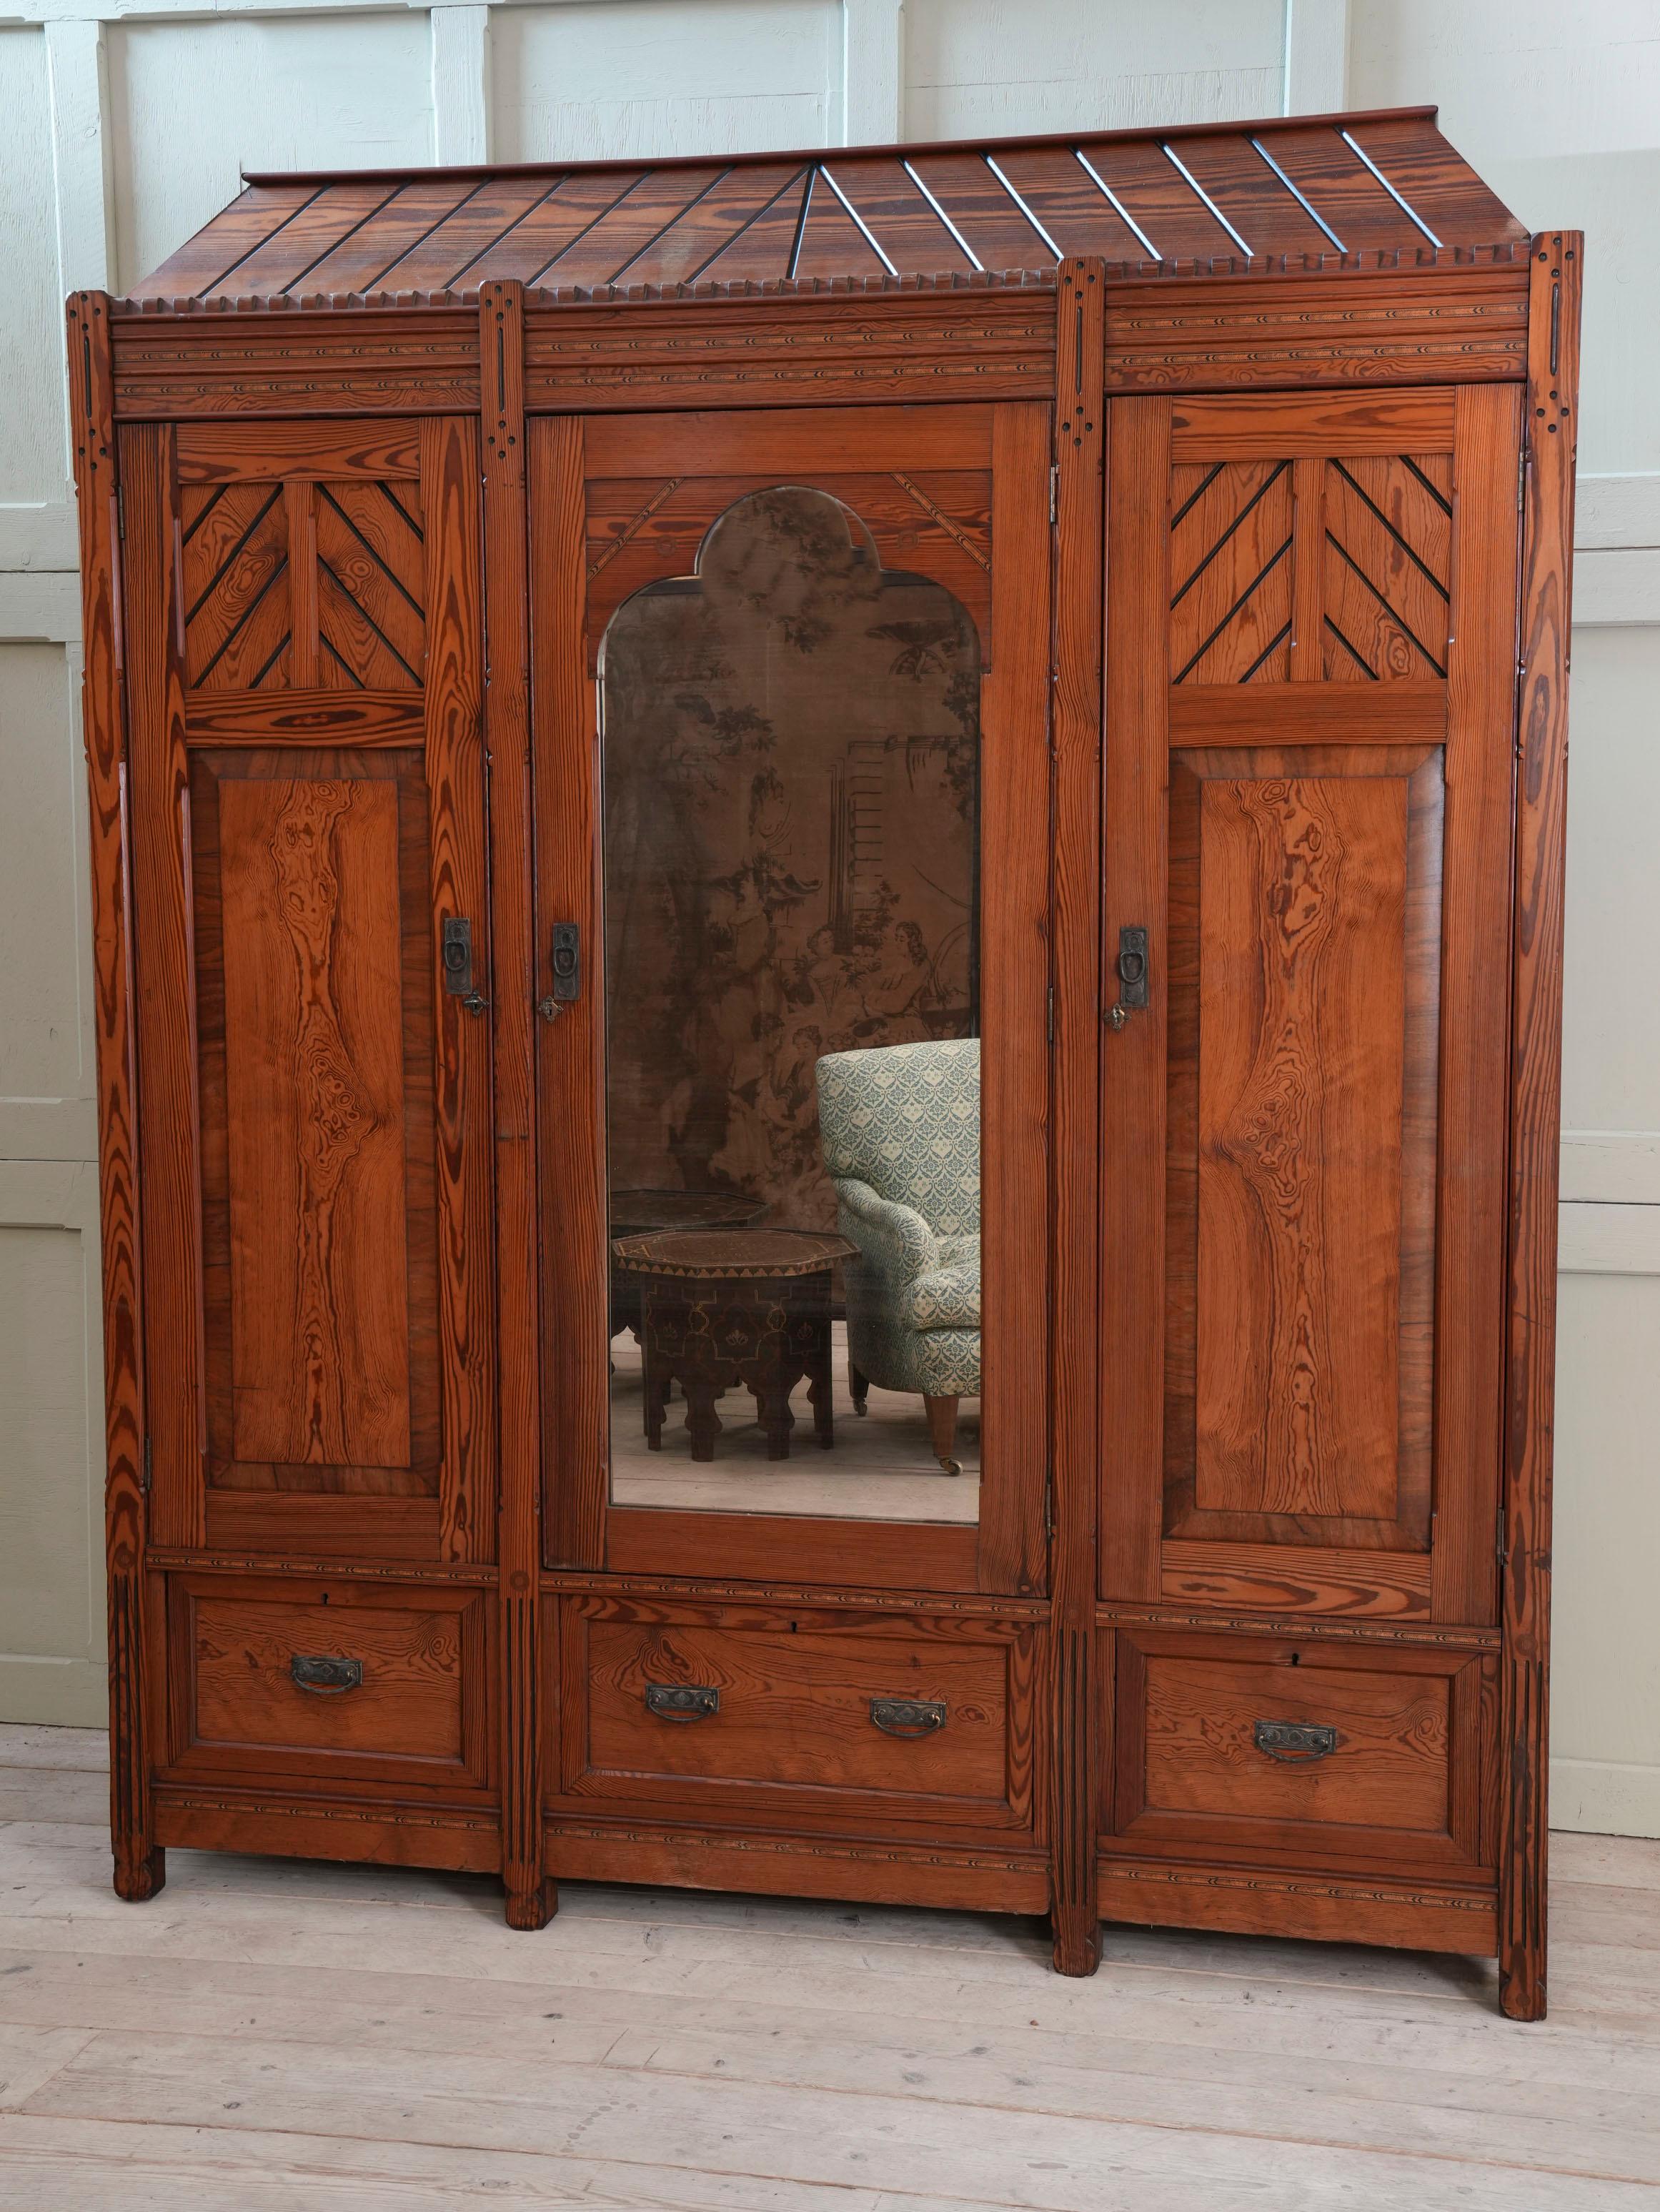 Two solid doors with hanging space behind flank the central mirrored door with sliding shelves behind above three drawers to the base.

In the manner of John Pollard Seddon 1827-1906.